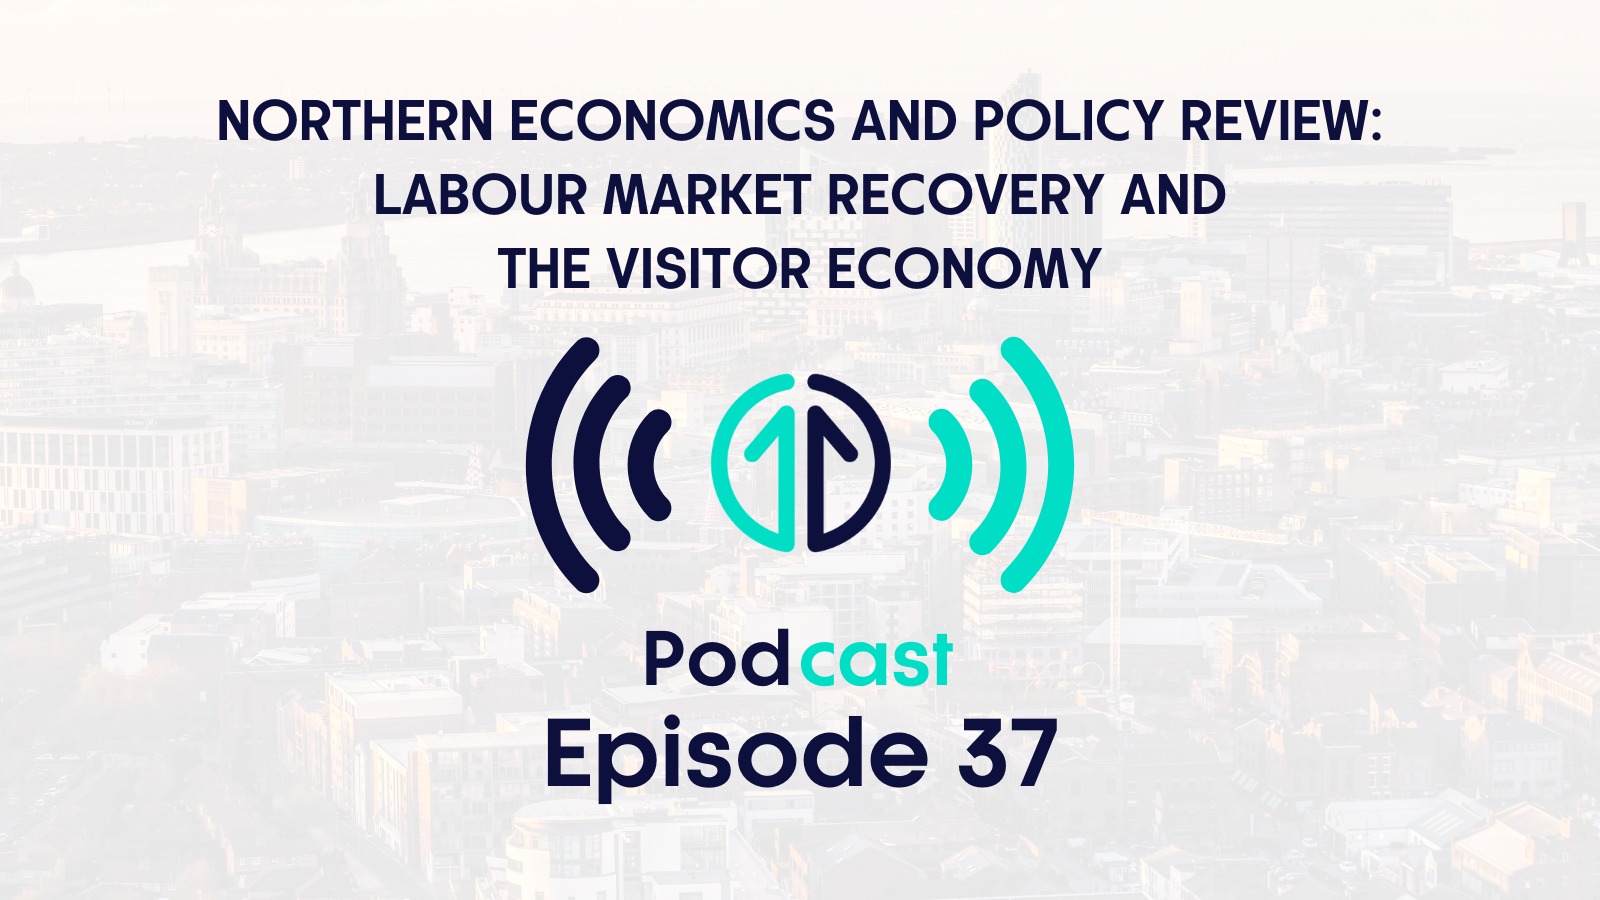 Northern Economics and Policy Review: Labour market recovery and the visitor economy podcast Episode 37